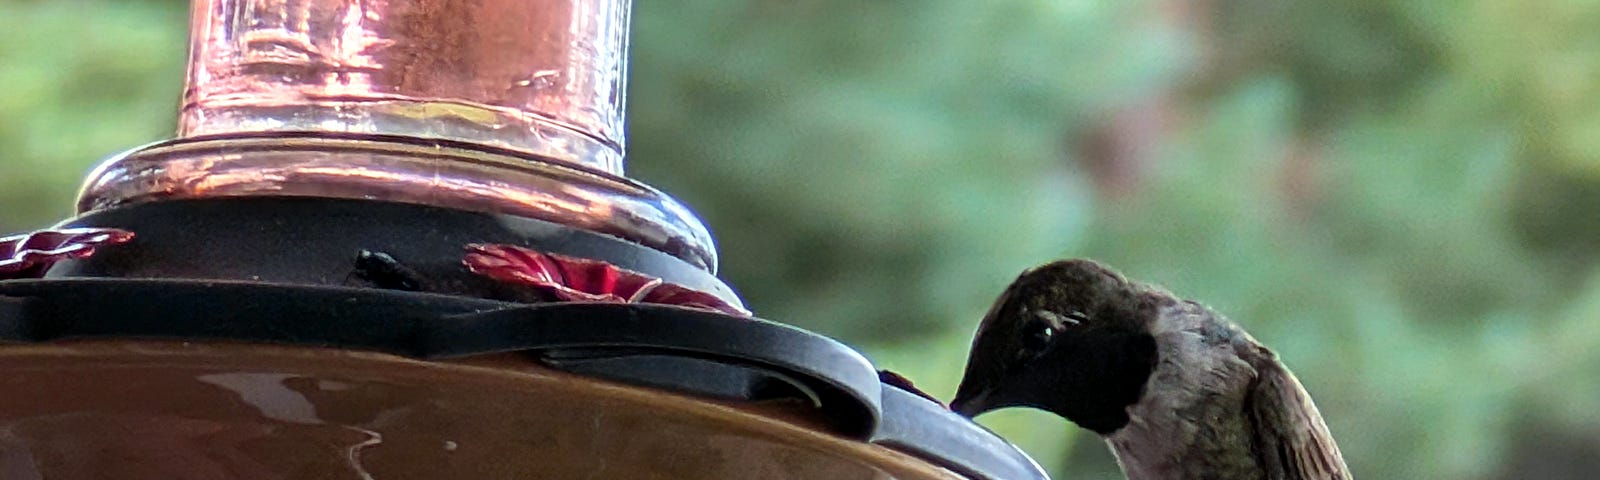 A hummingbird feeds from a red and orange feeder with a blurred green background. The bird’s delicate wings are folded while it drinks nectar.